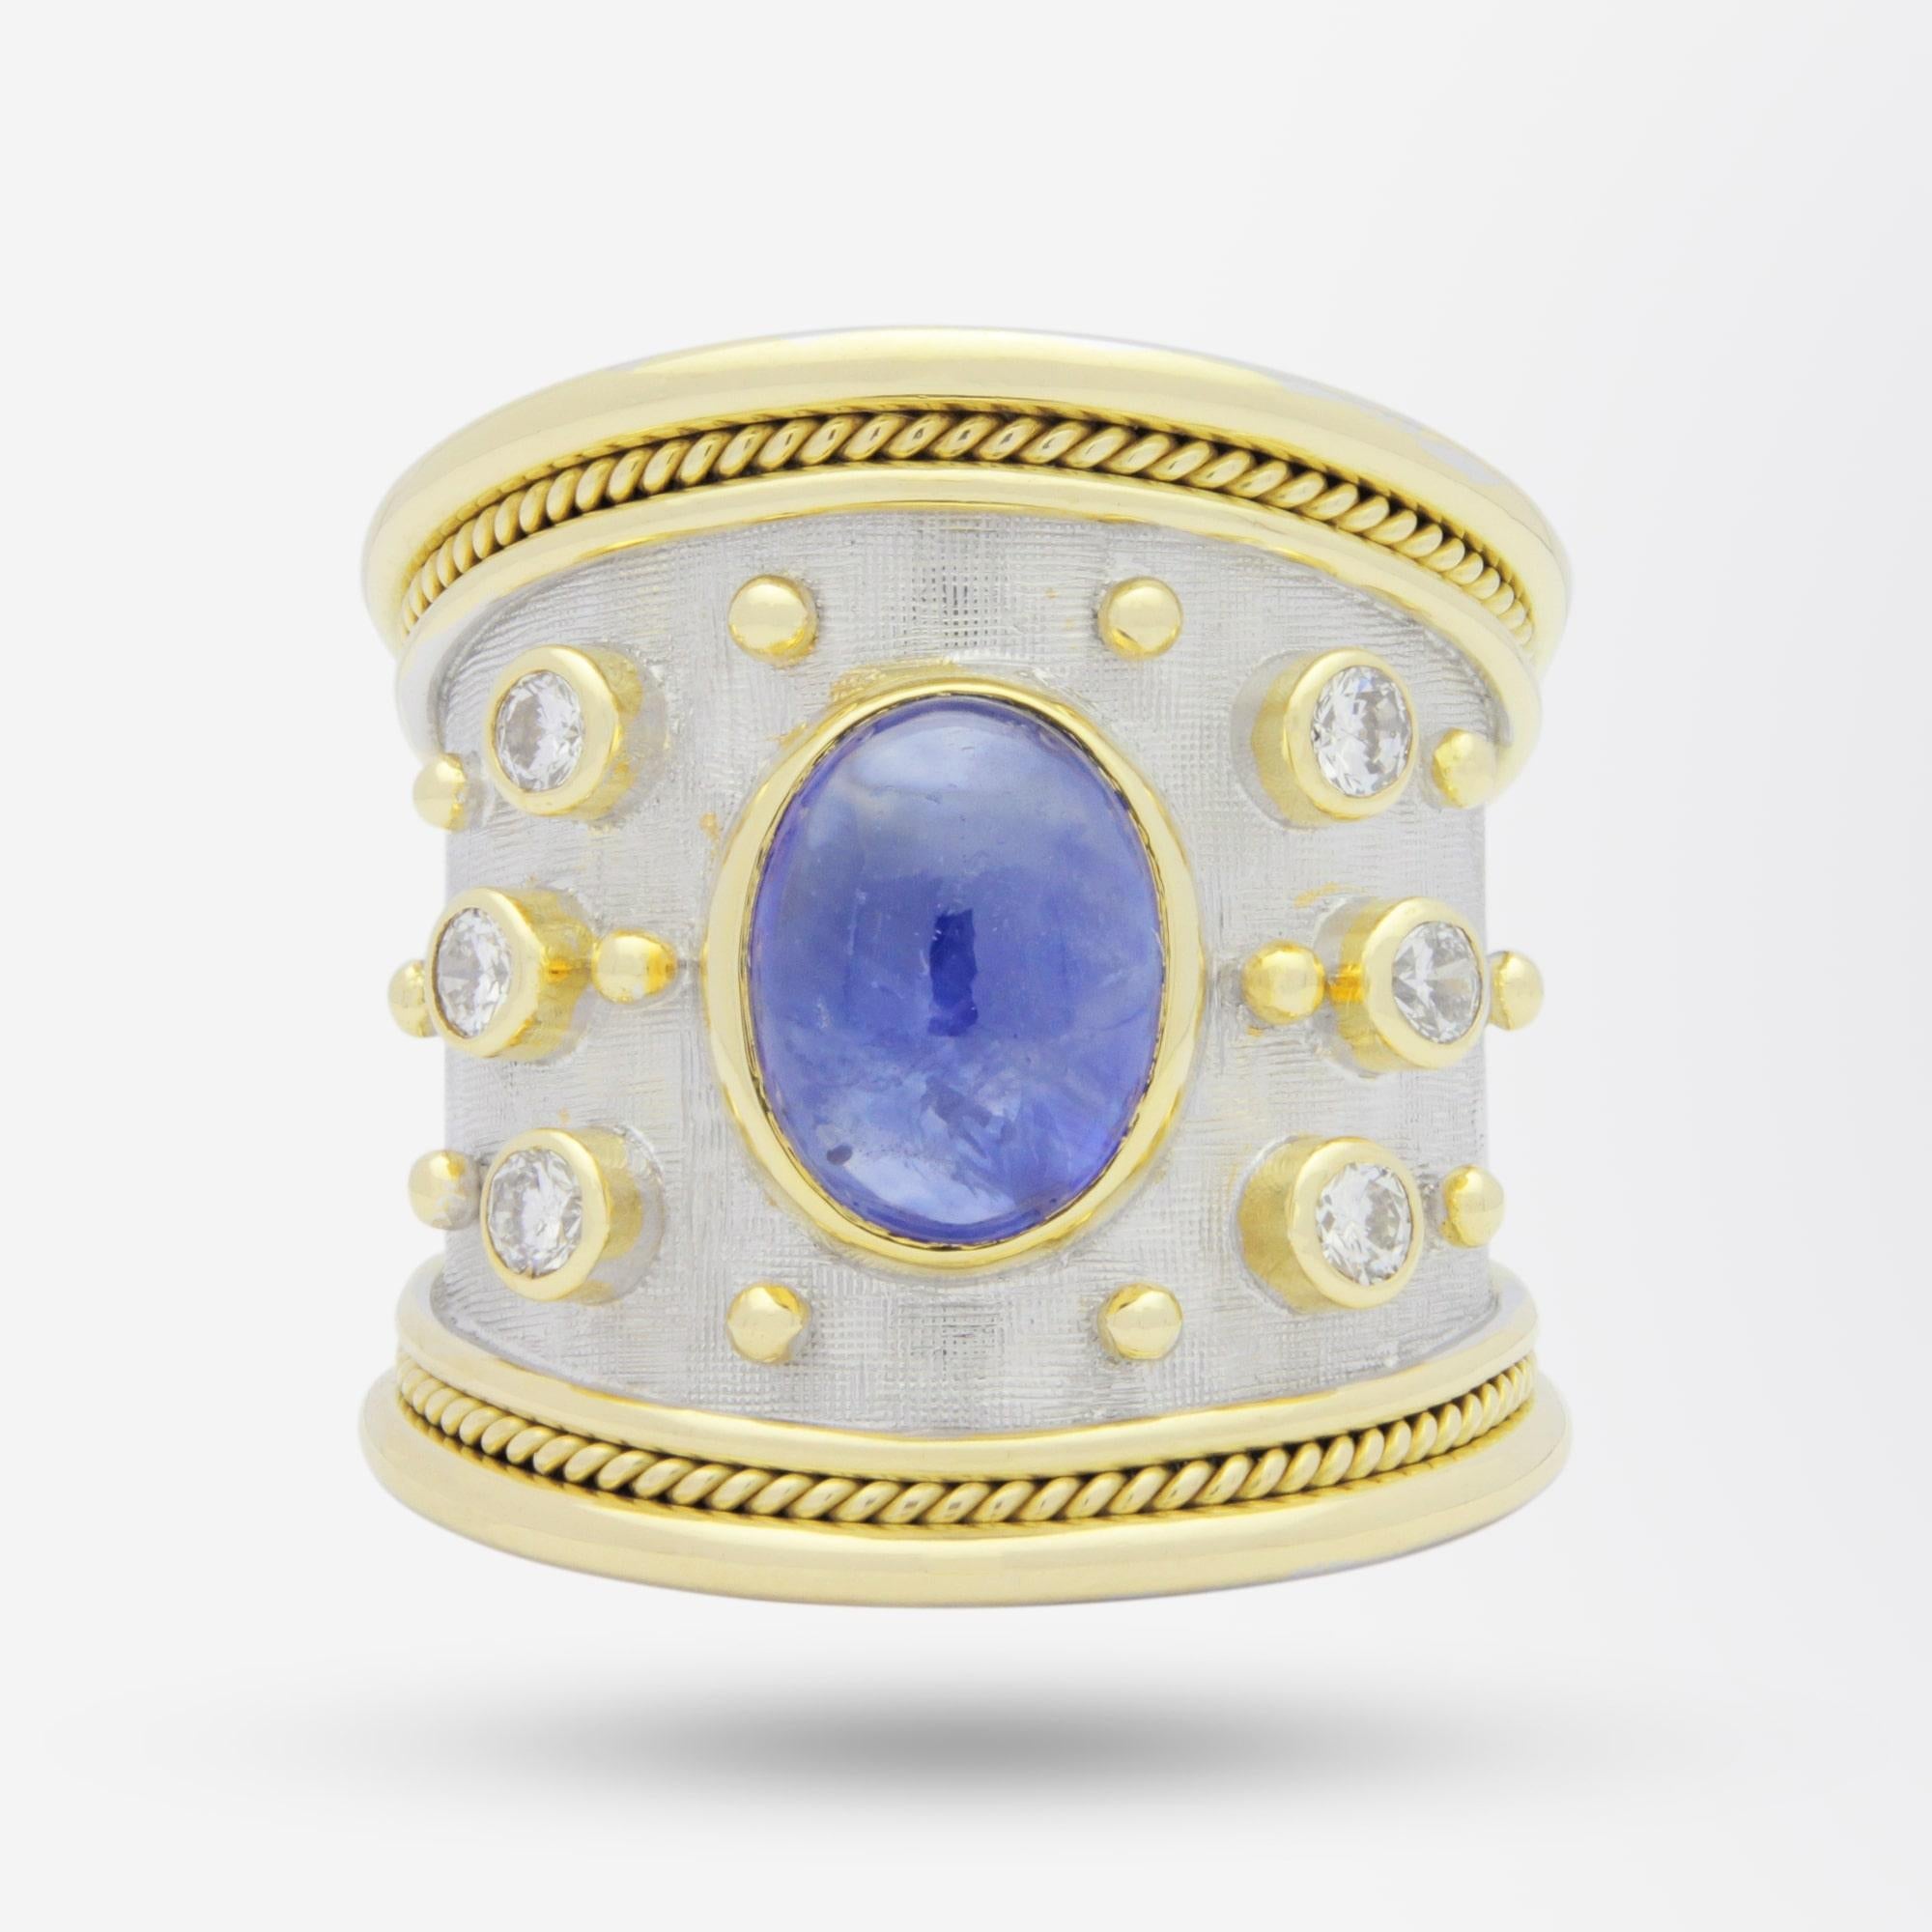 A fine gold, diamond and sapphire 'Templar' ring by esteemed British jeweller, Elizabeth Gage. The 18 karat yellow and white gold 'cigar' band shaped ring is set with a central 3.20 carat cabochon 'moderately bright mid slightly purplish blue